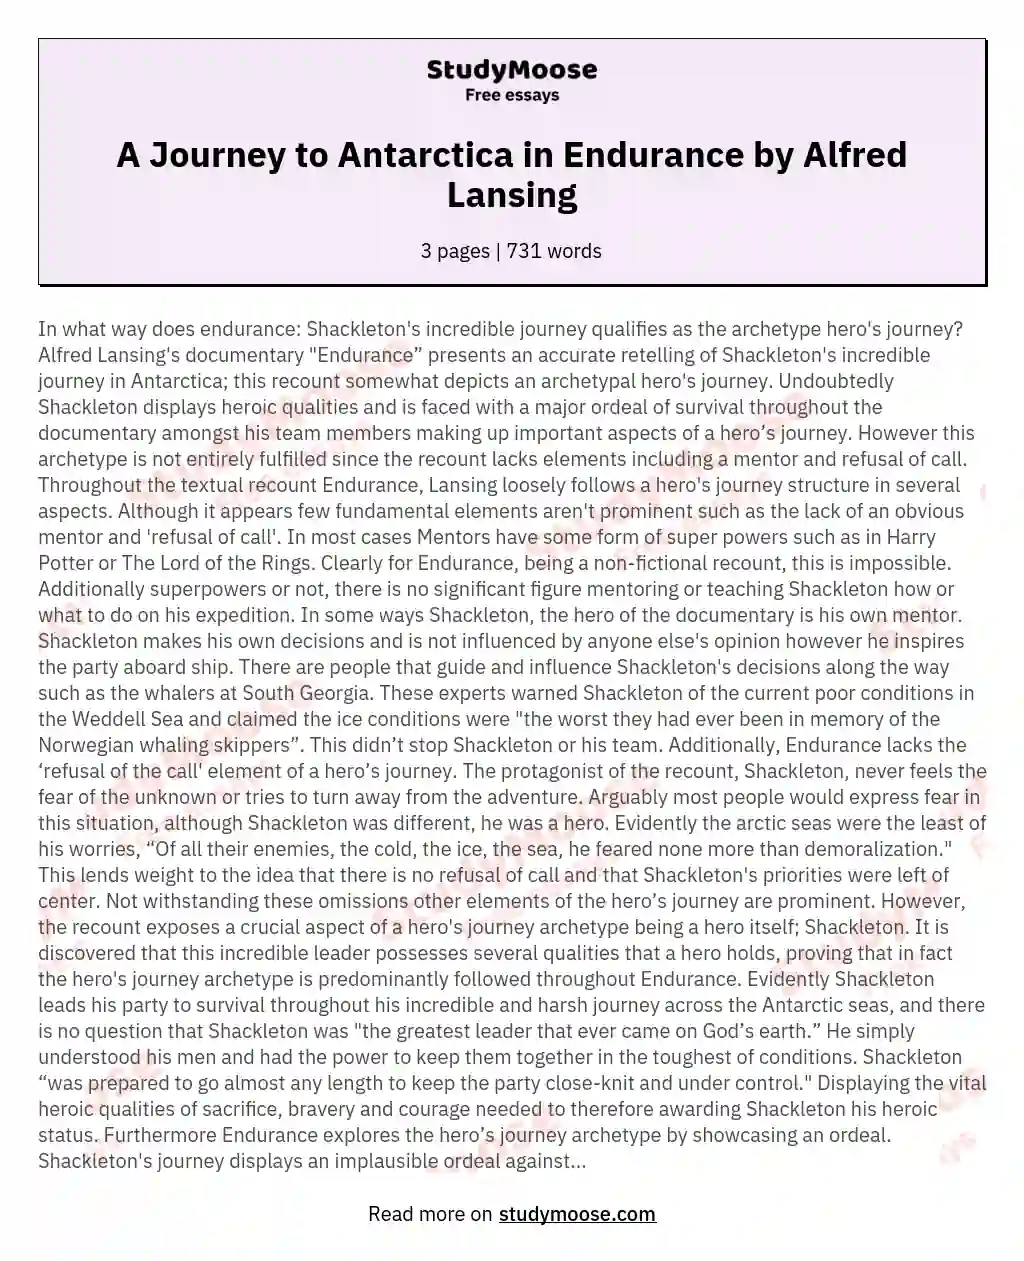 A Journey to Antarctica in Endurance by Alfred Lansing essay